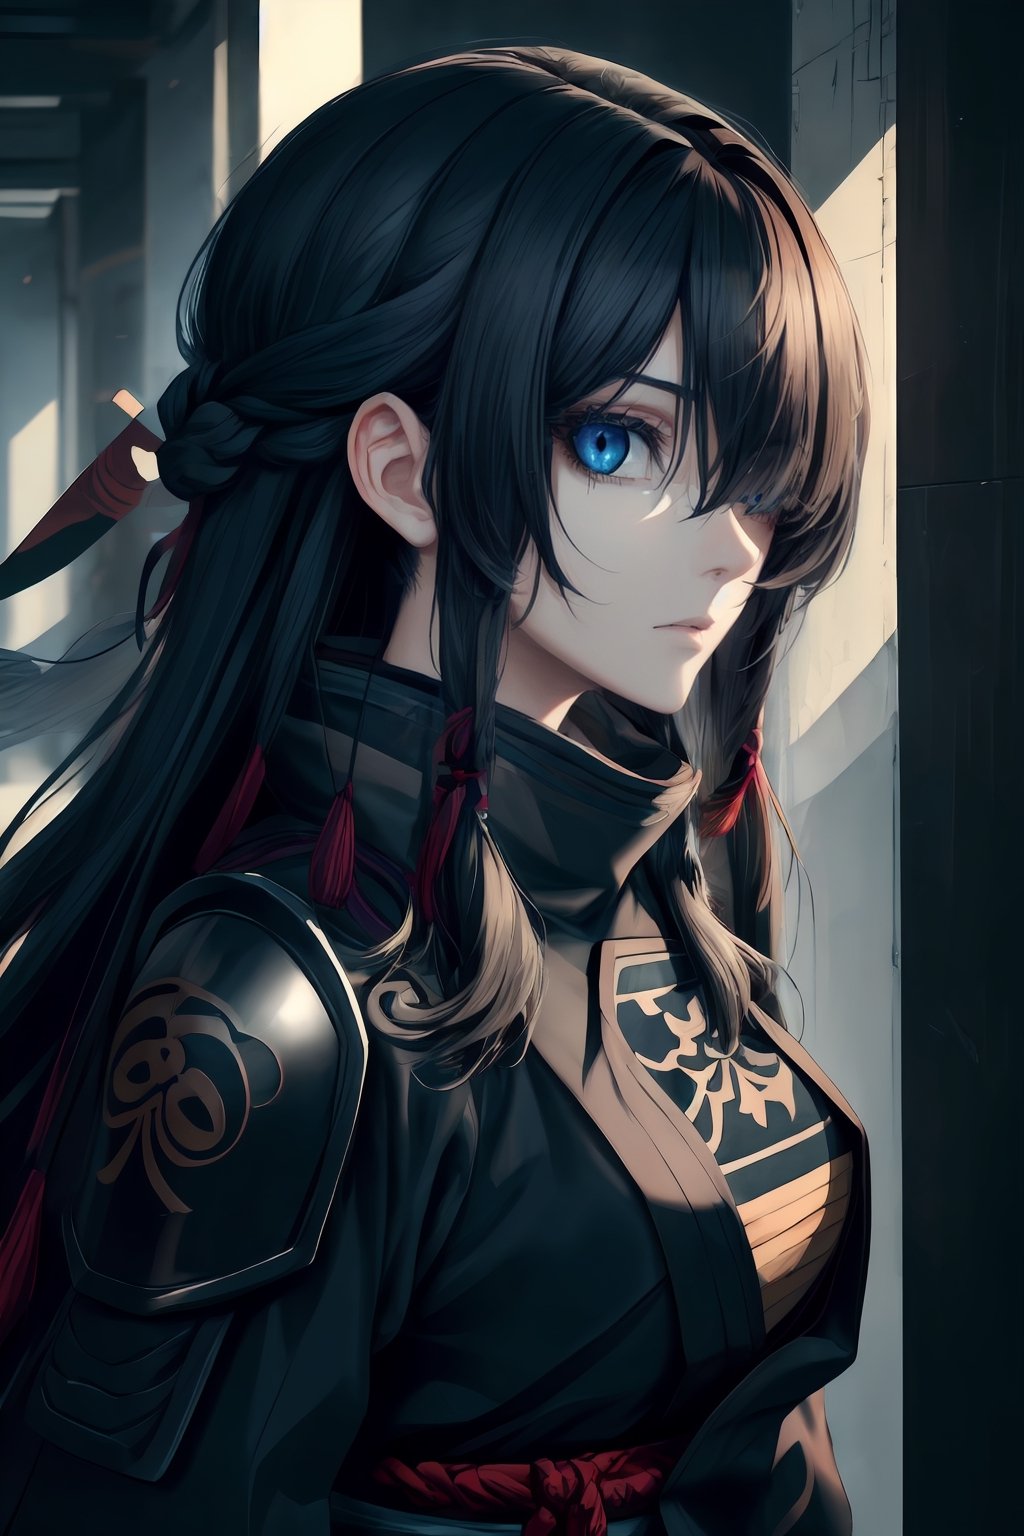 best quality, masterpiece, 1girl,older_female,highres, best quality, masterpiece, 1girl,highres,older_female,solo, blue_eyes,detailed blue eyes,scary gaze,sidelocks, closed_mouth, upper_body,hollow eyes,eyelashes,eyeshadow, long black hair,hair_over_eye,hair over one eye,Shinobi,japanese armor,viewed_from_side,looking_at_viewer,looking to the side,yui